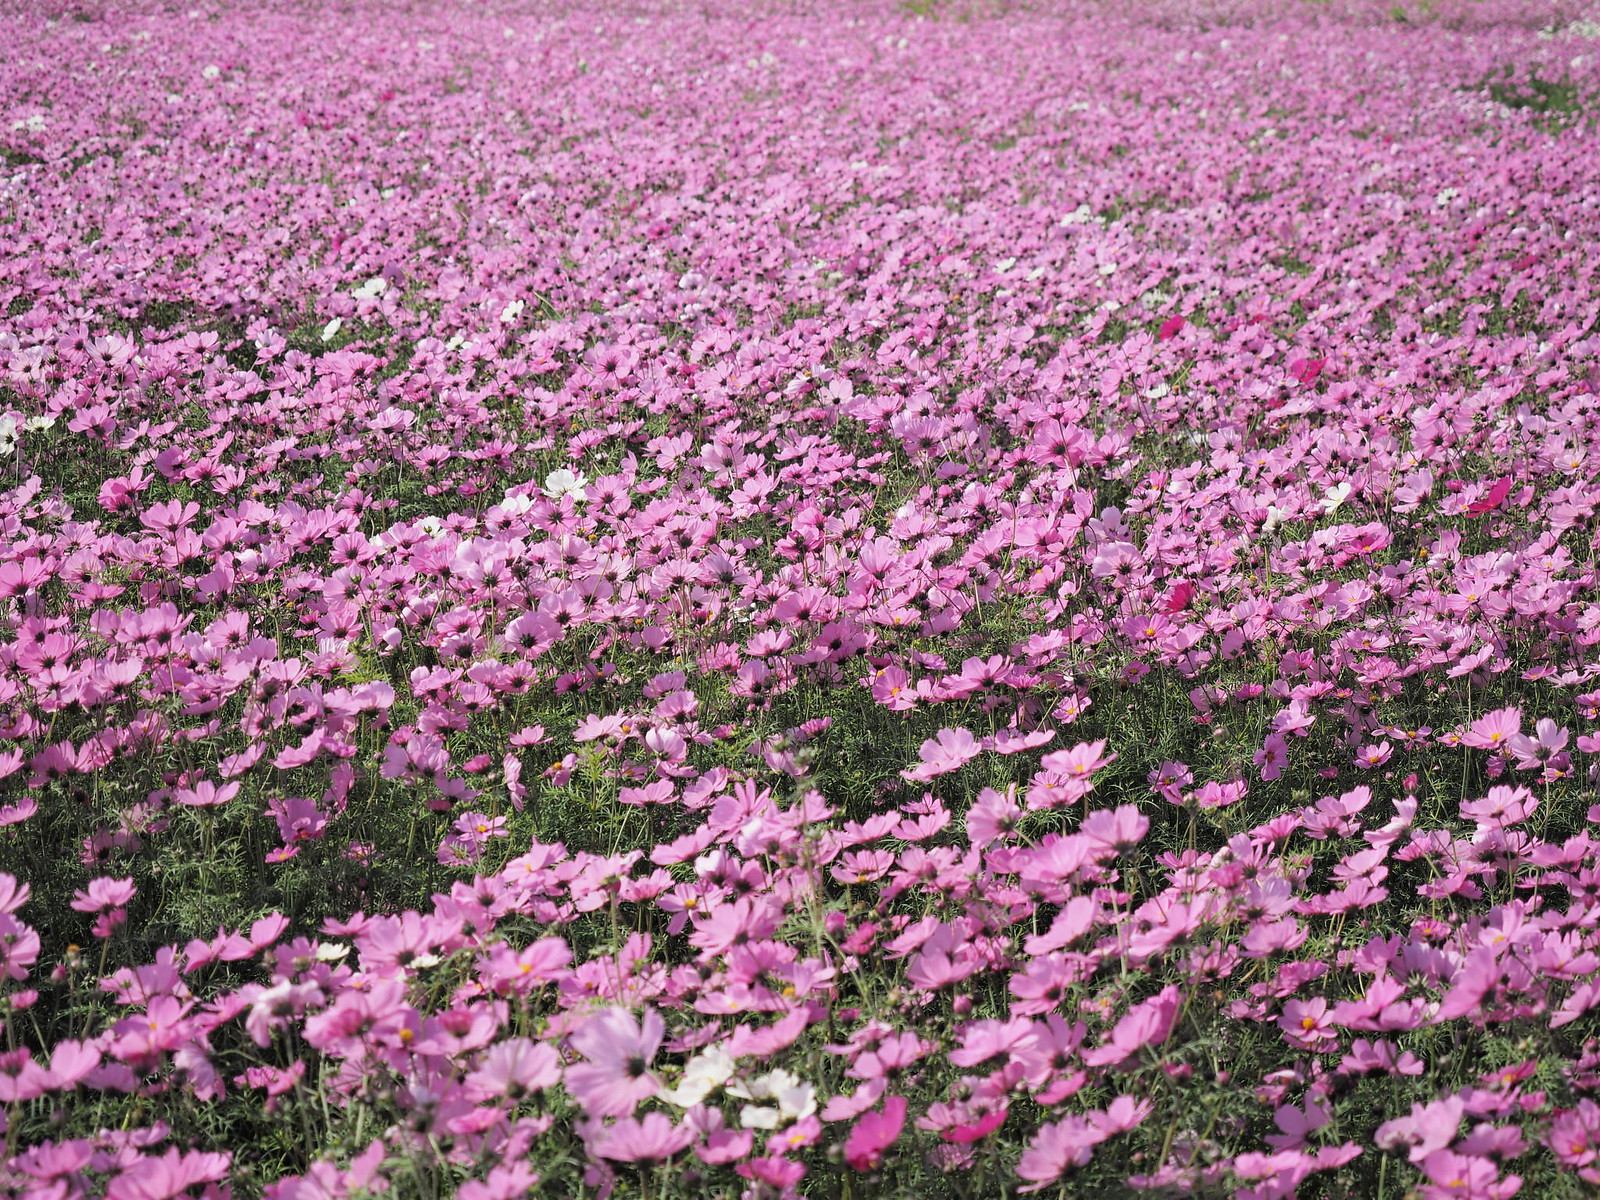 Sea of blossoming flowers.